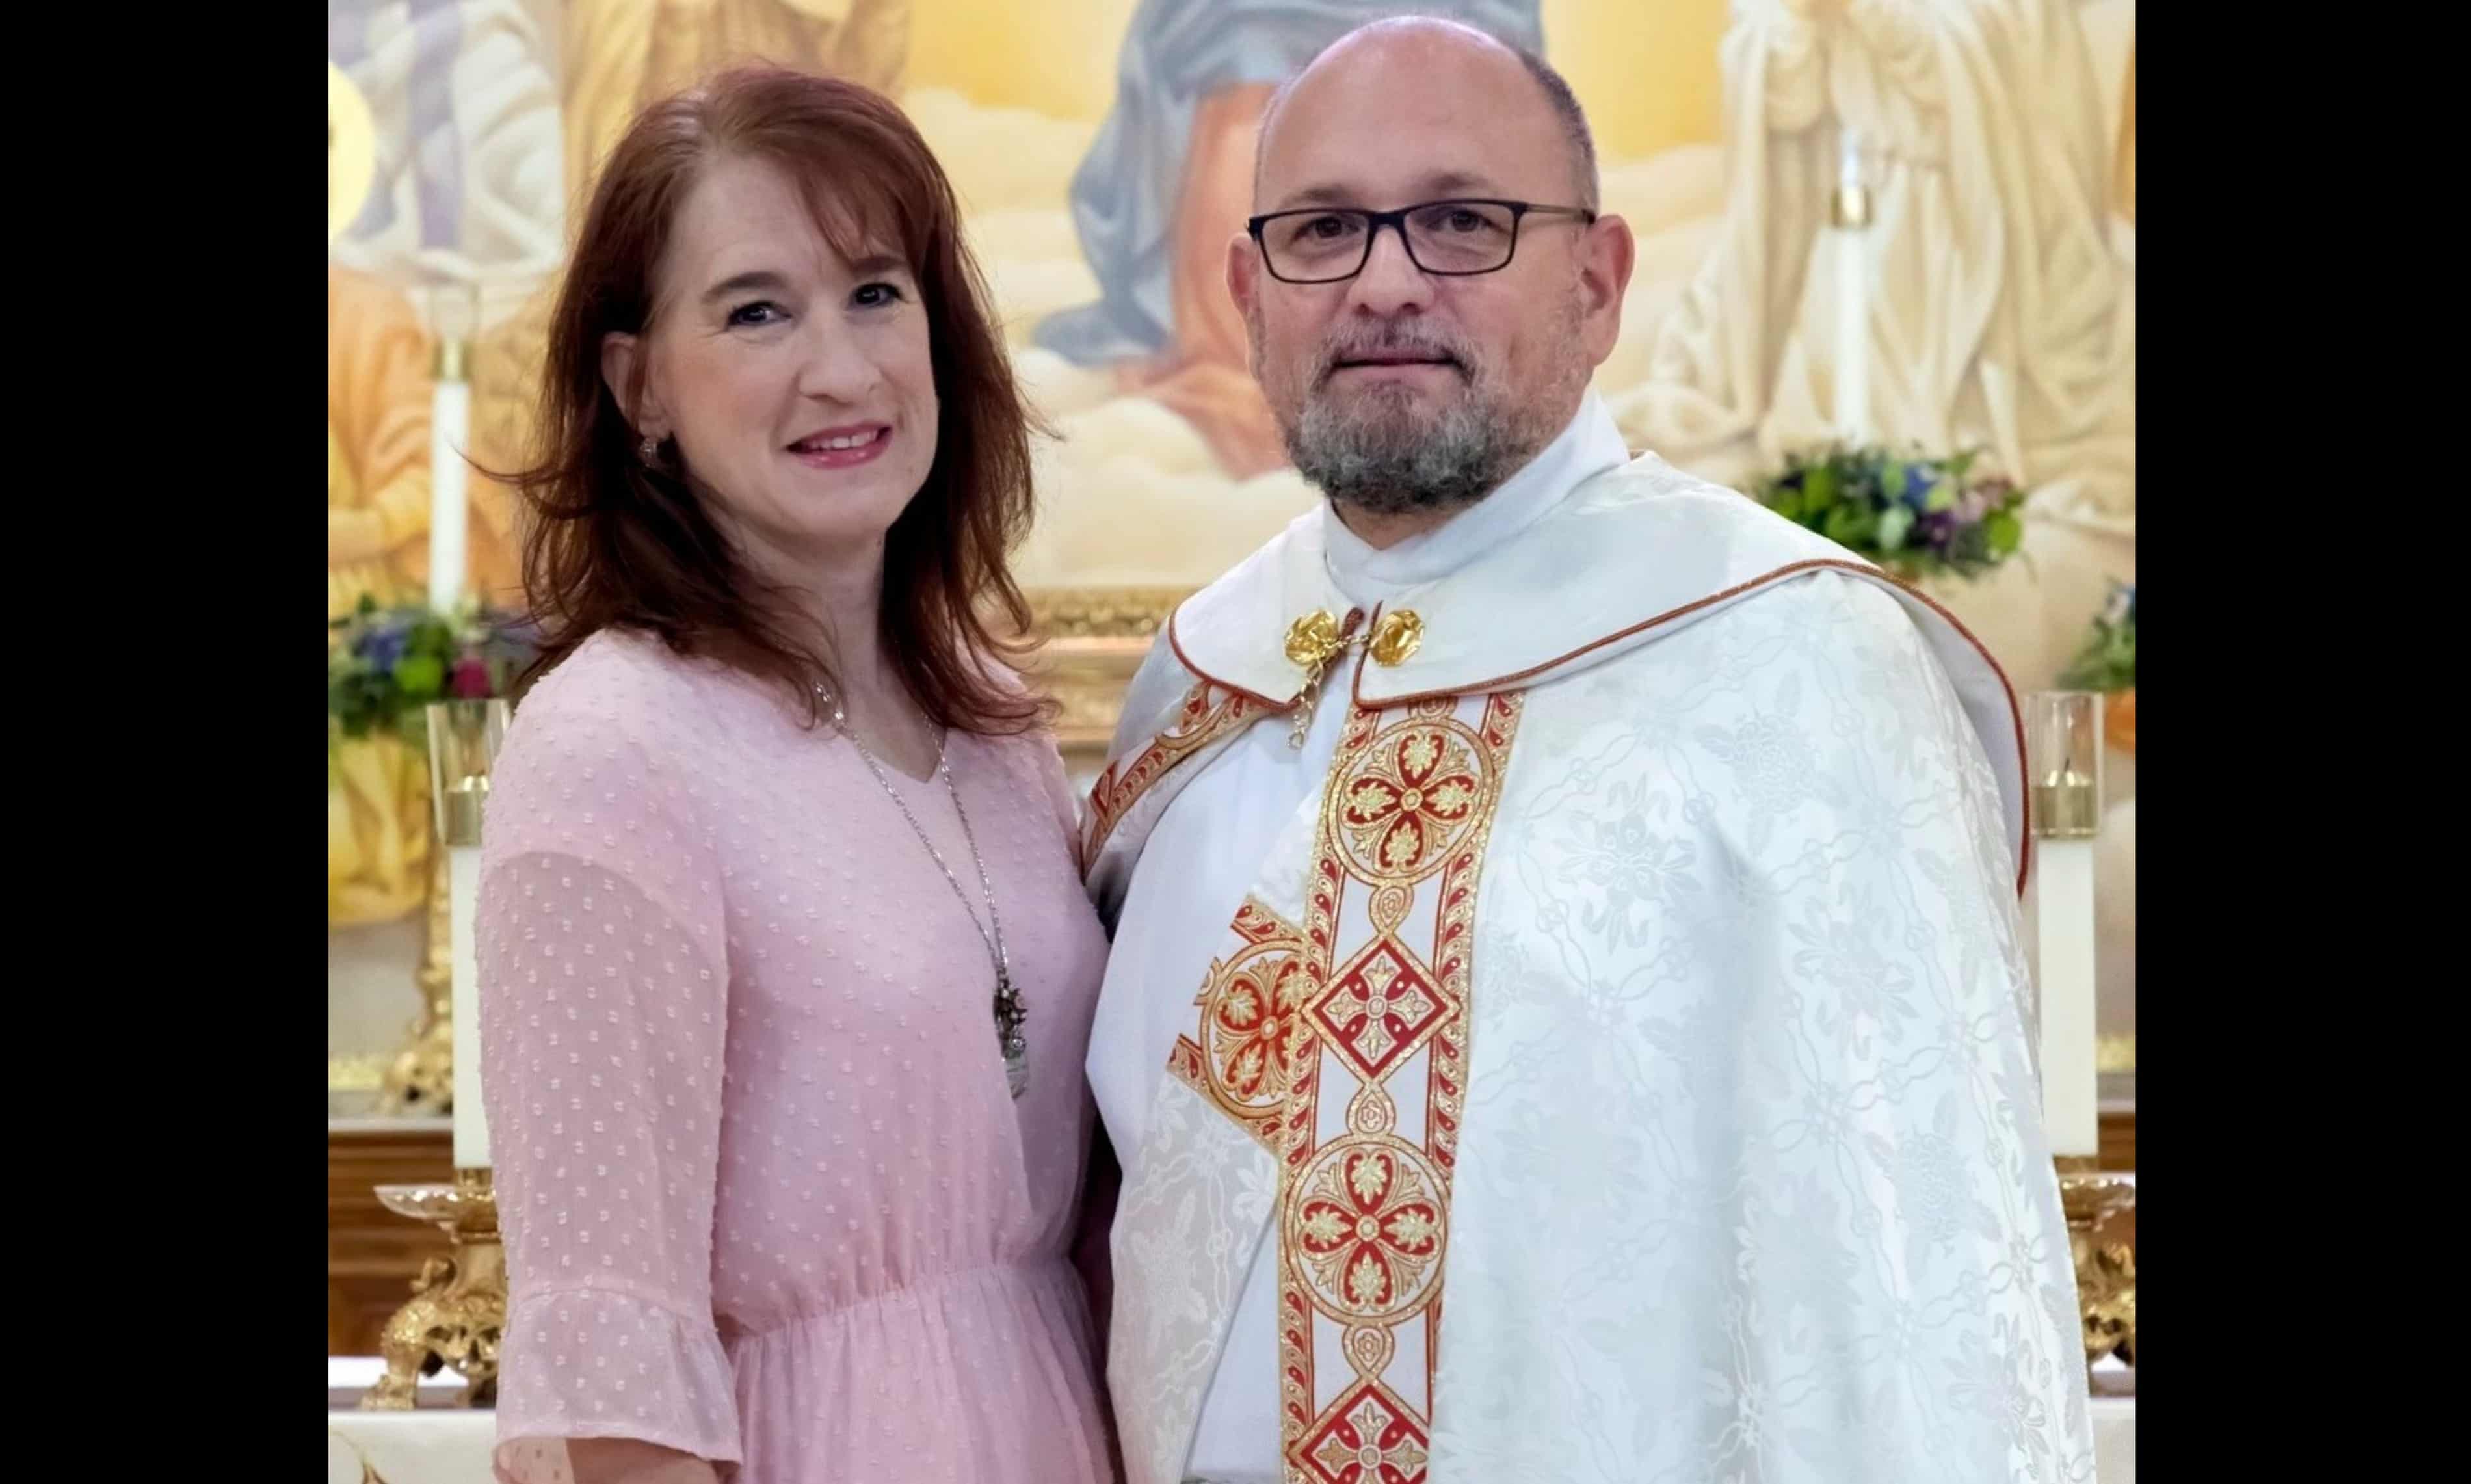 Ex-Louisiana deacon whose son was sexually abused by a priest is excommunicated from church (theguardian.com)